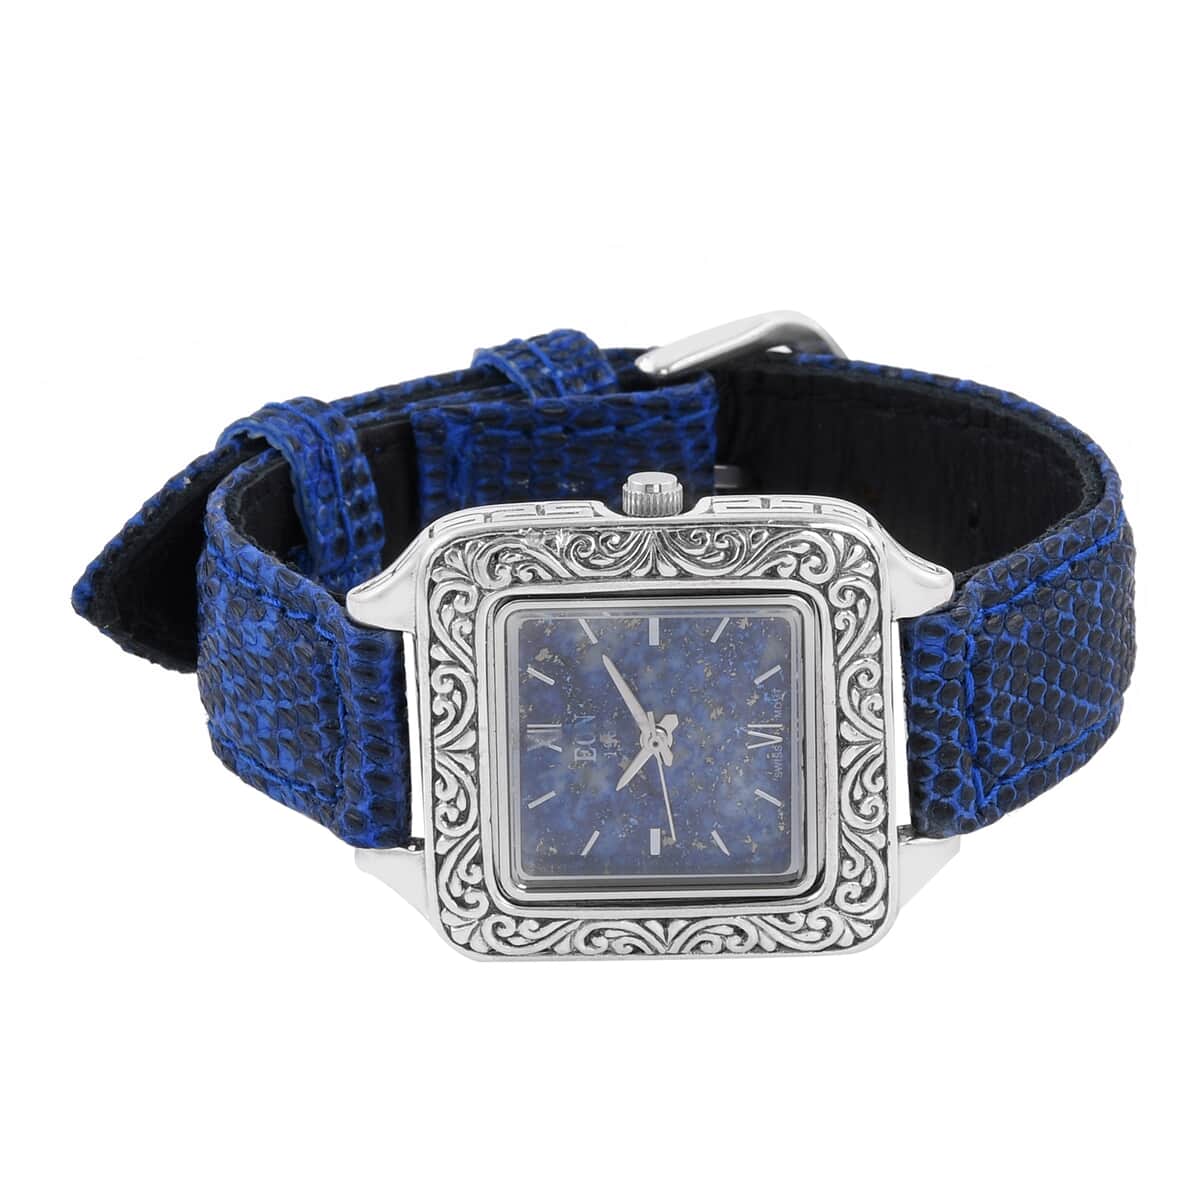 BALI LEGACY EON 1962 Lapis Lazuli Swiss Movement Watch in Sterling Silver and Stainless Steel with Royal Blue Lizard Color Leather Strap (20 g) image number 3